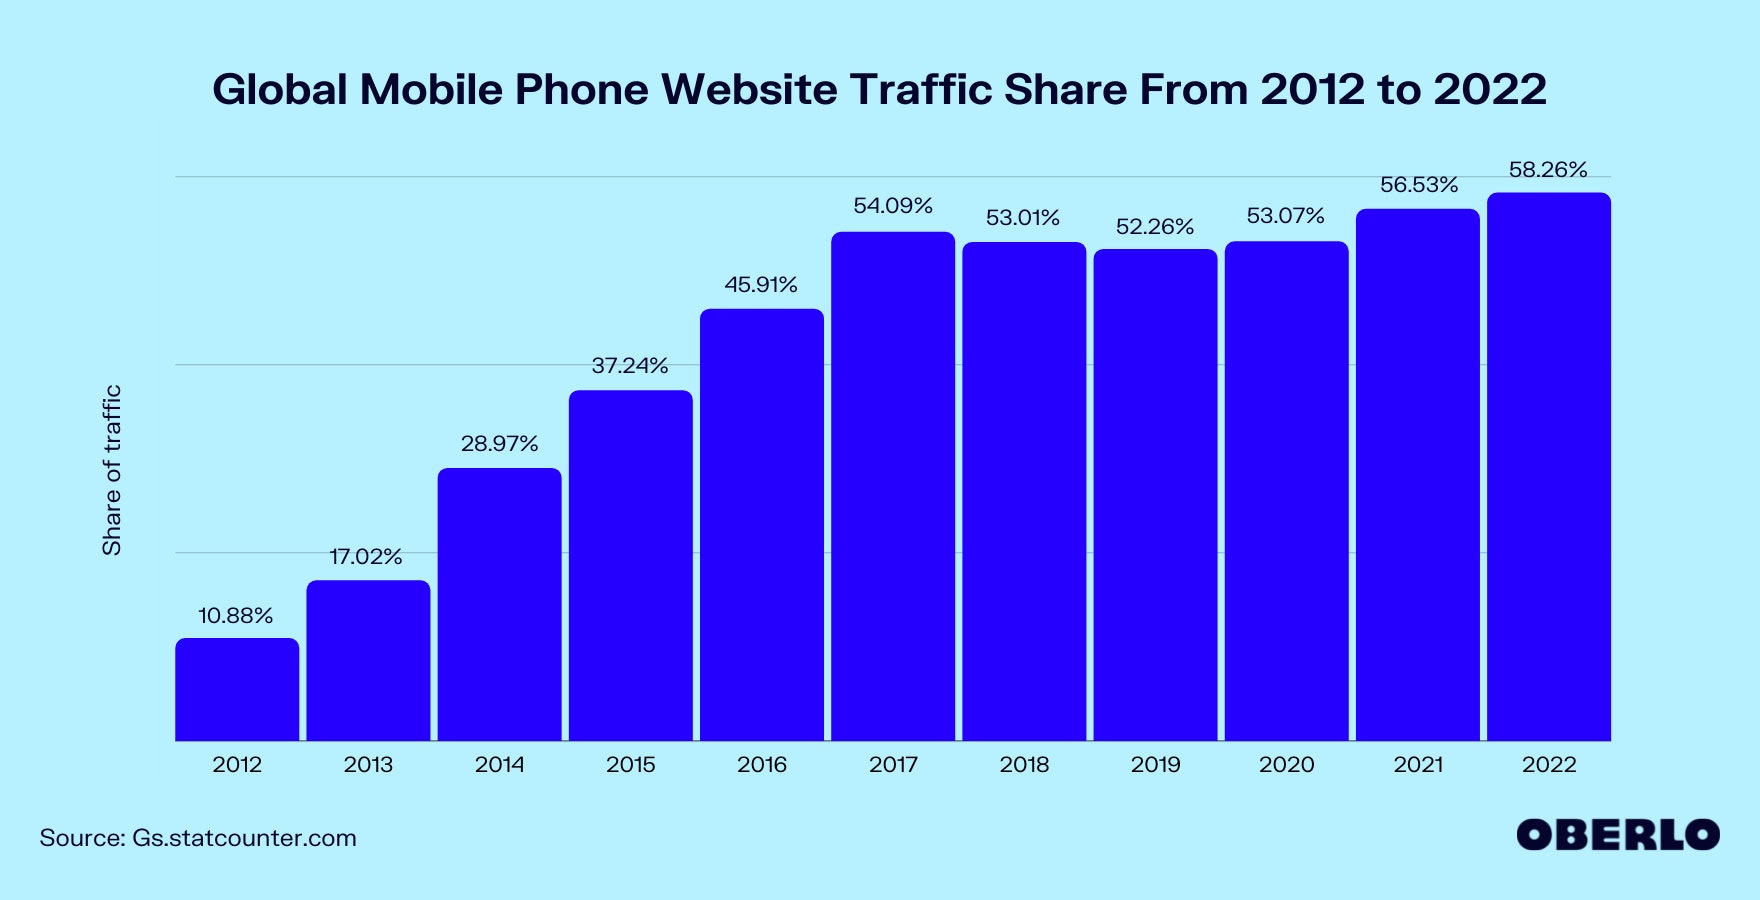 Chart of the Global Mobile Phone Website Traffic Share From 2012 to 2022